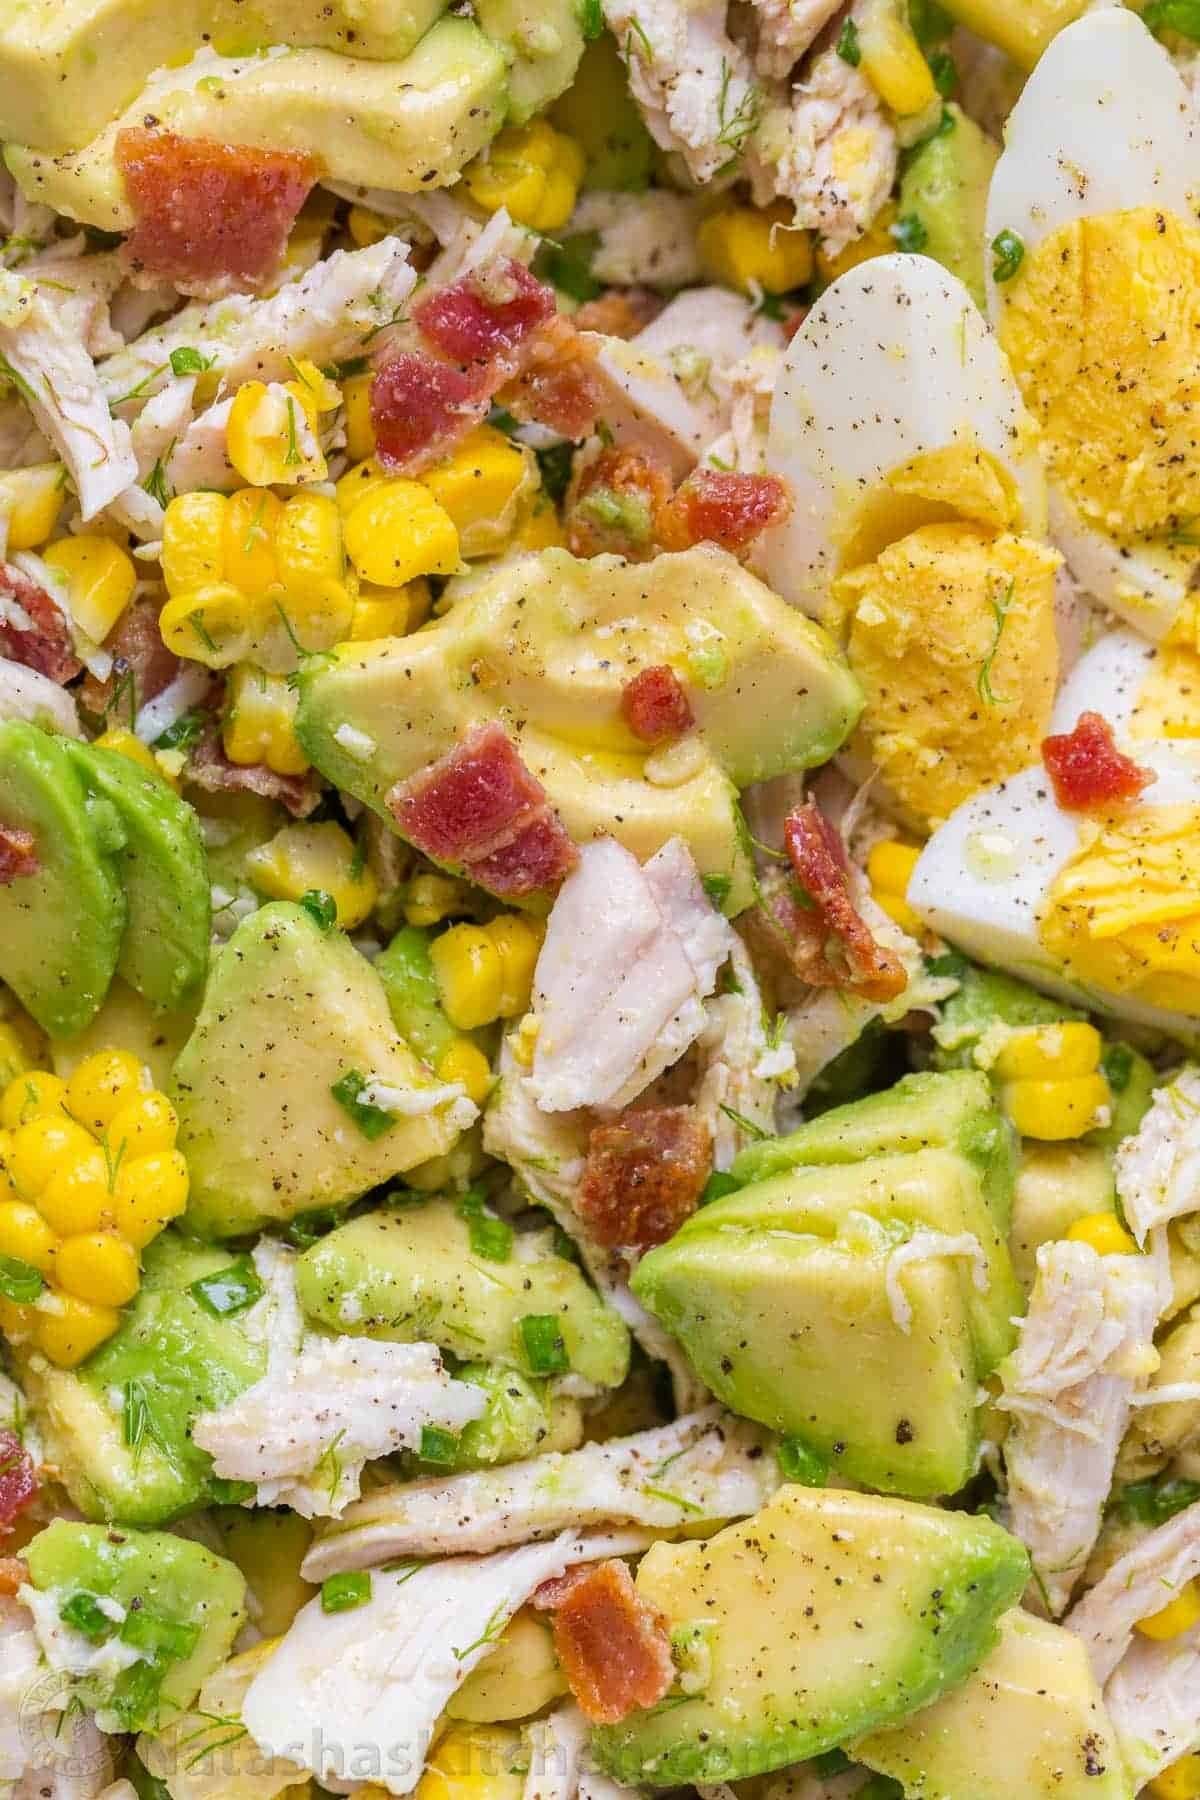 Avocado Chicken Salad with bacon, egg, corn, chives and dill